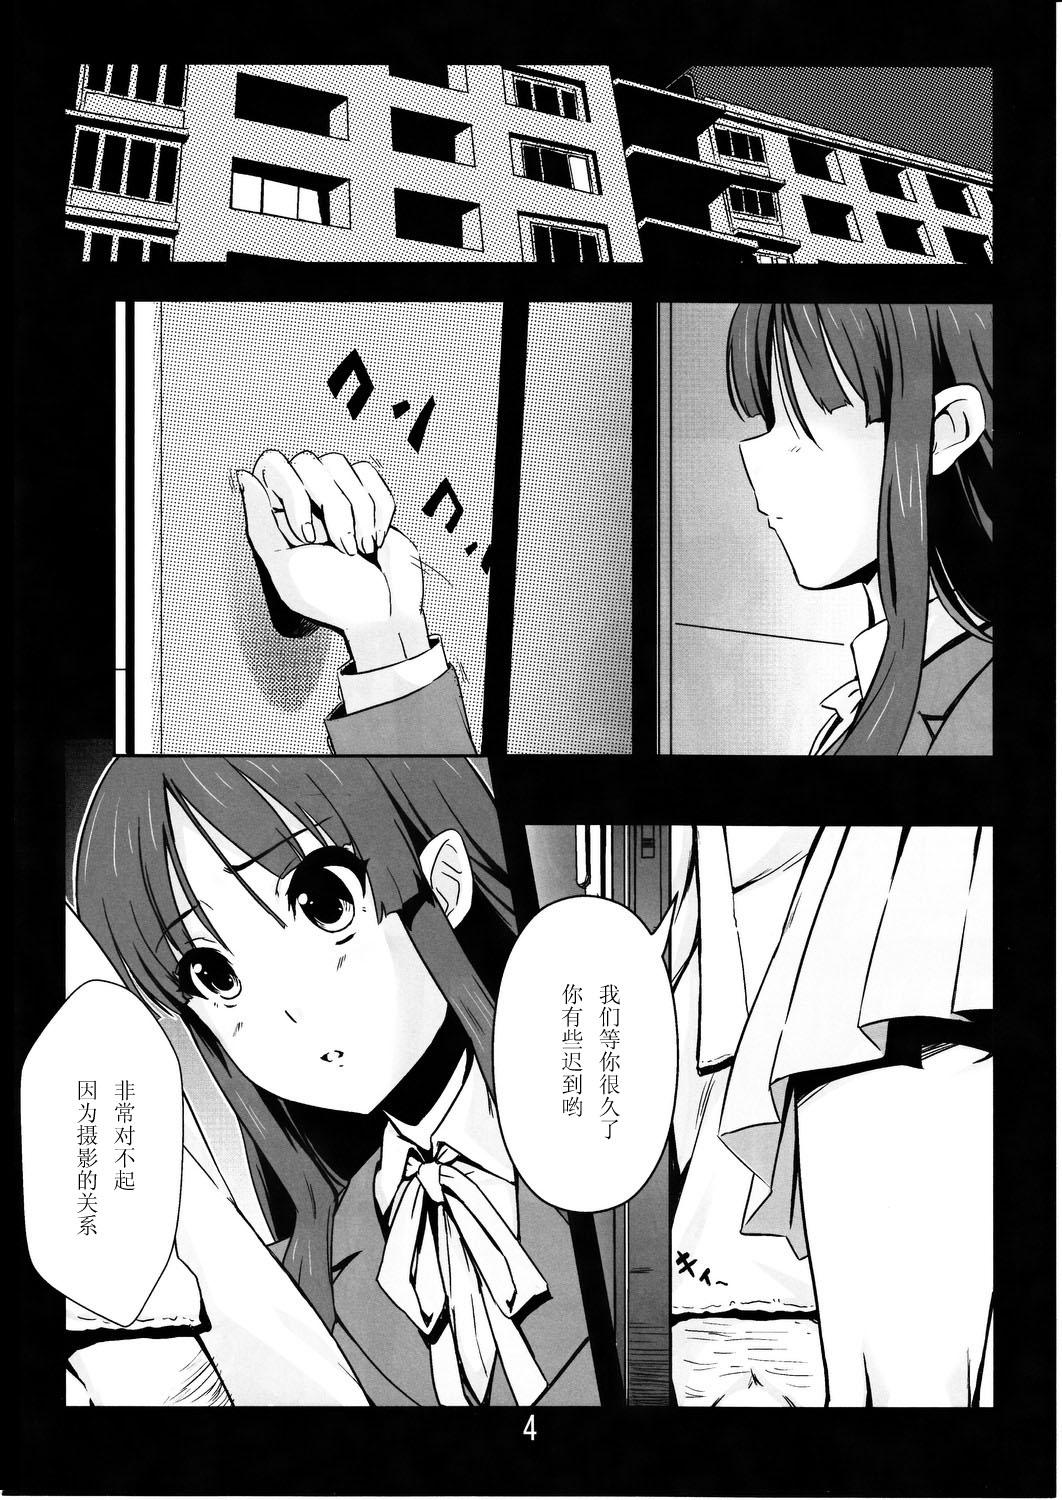 Awesome Listen to me! - K-on Missionary Porn - Page 3